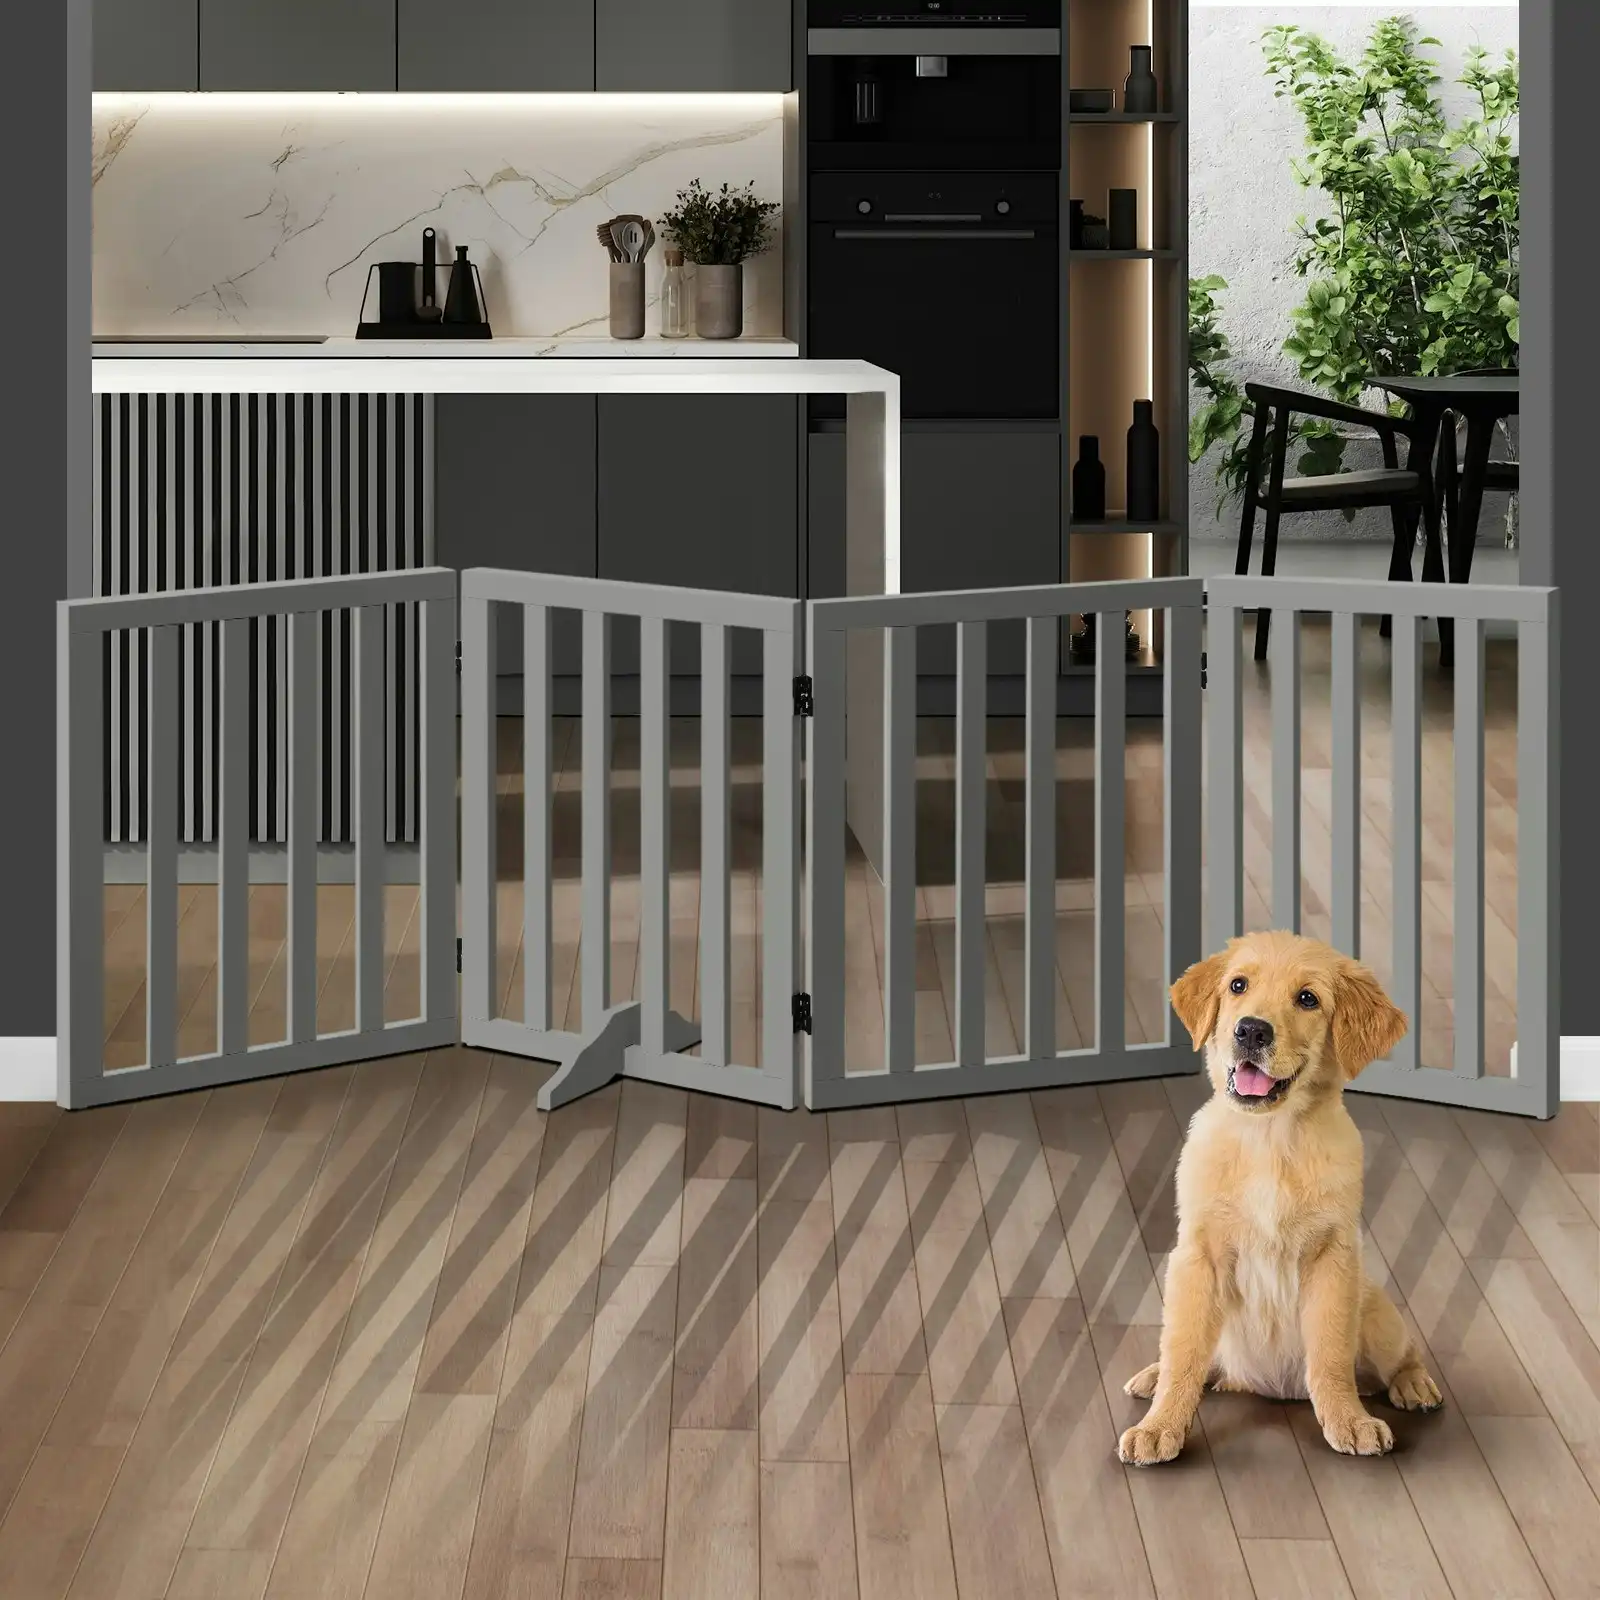 Alopet Wooden Pet Gate Dog Fence Safety Stair Barrier Security Door 4-Panel Grey